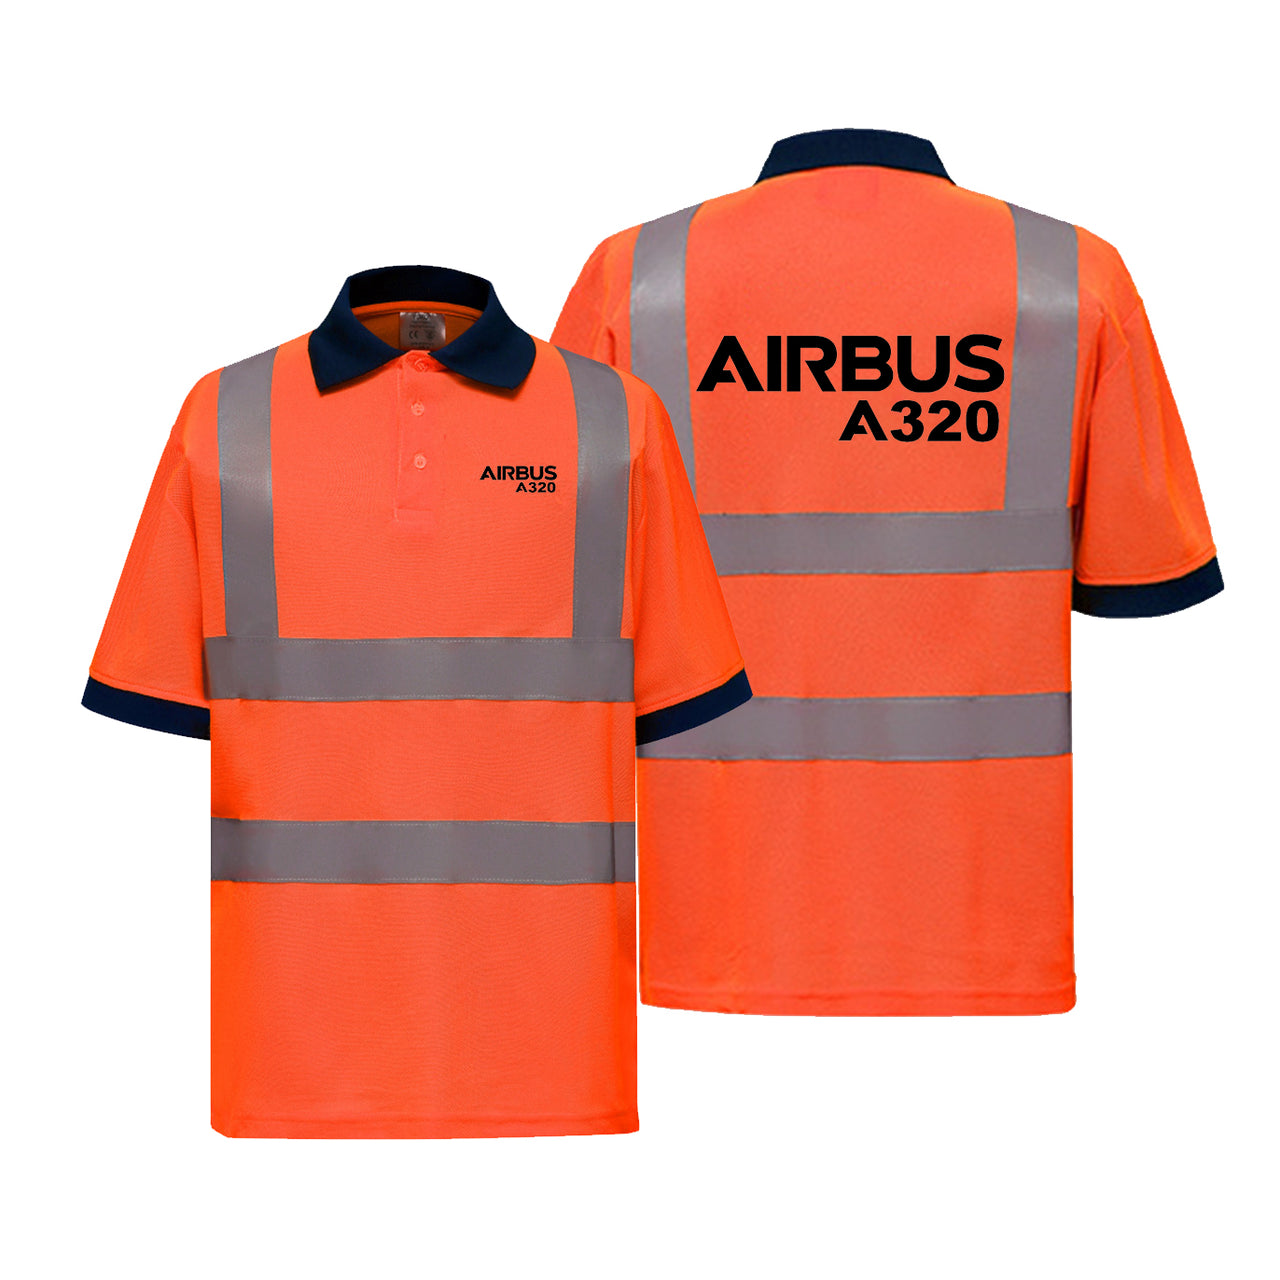 Airbus A320 & Text Designed Reflective Polo T-Shirts